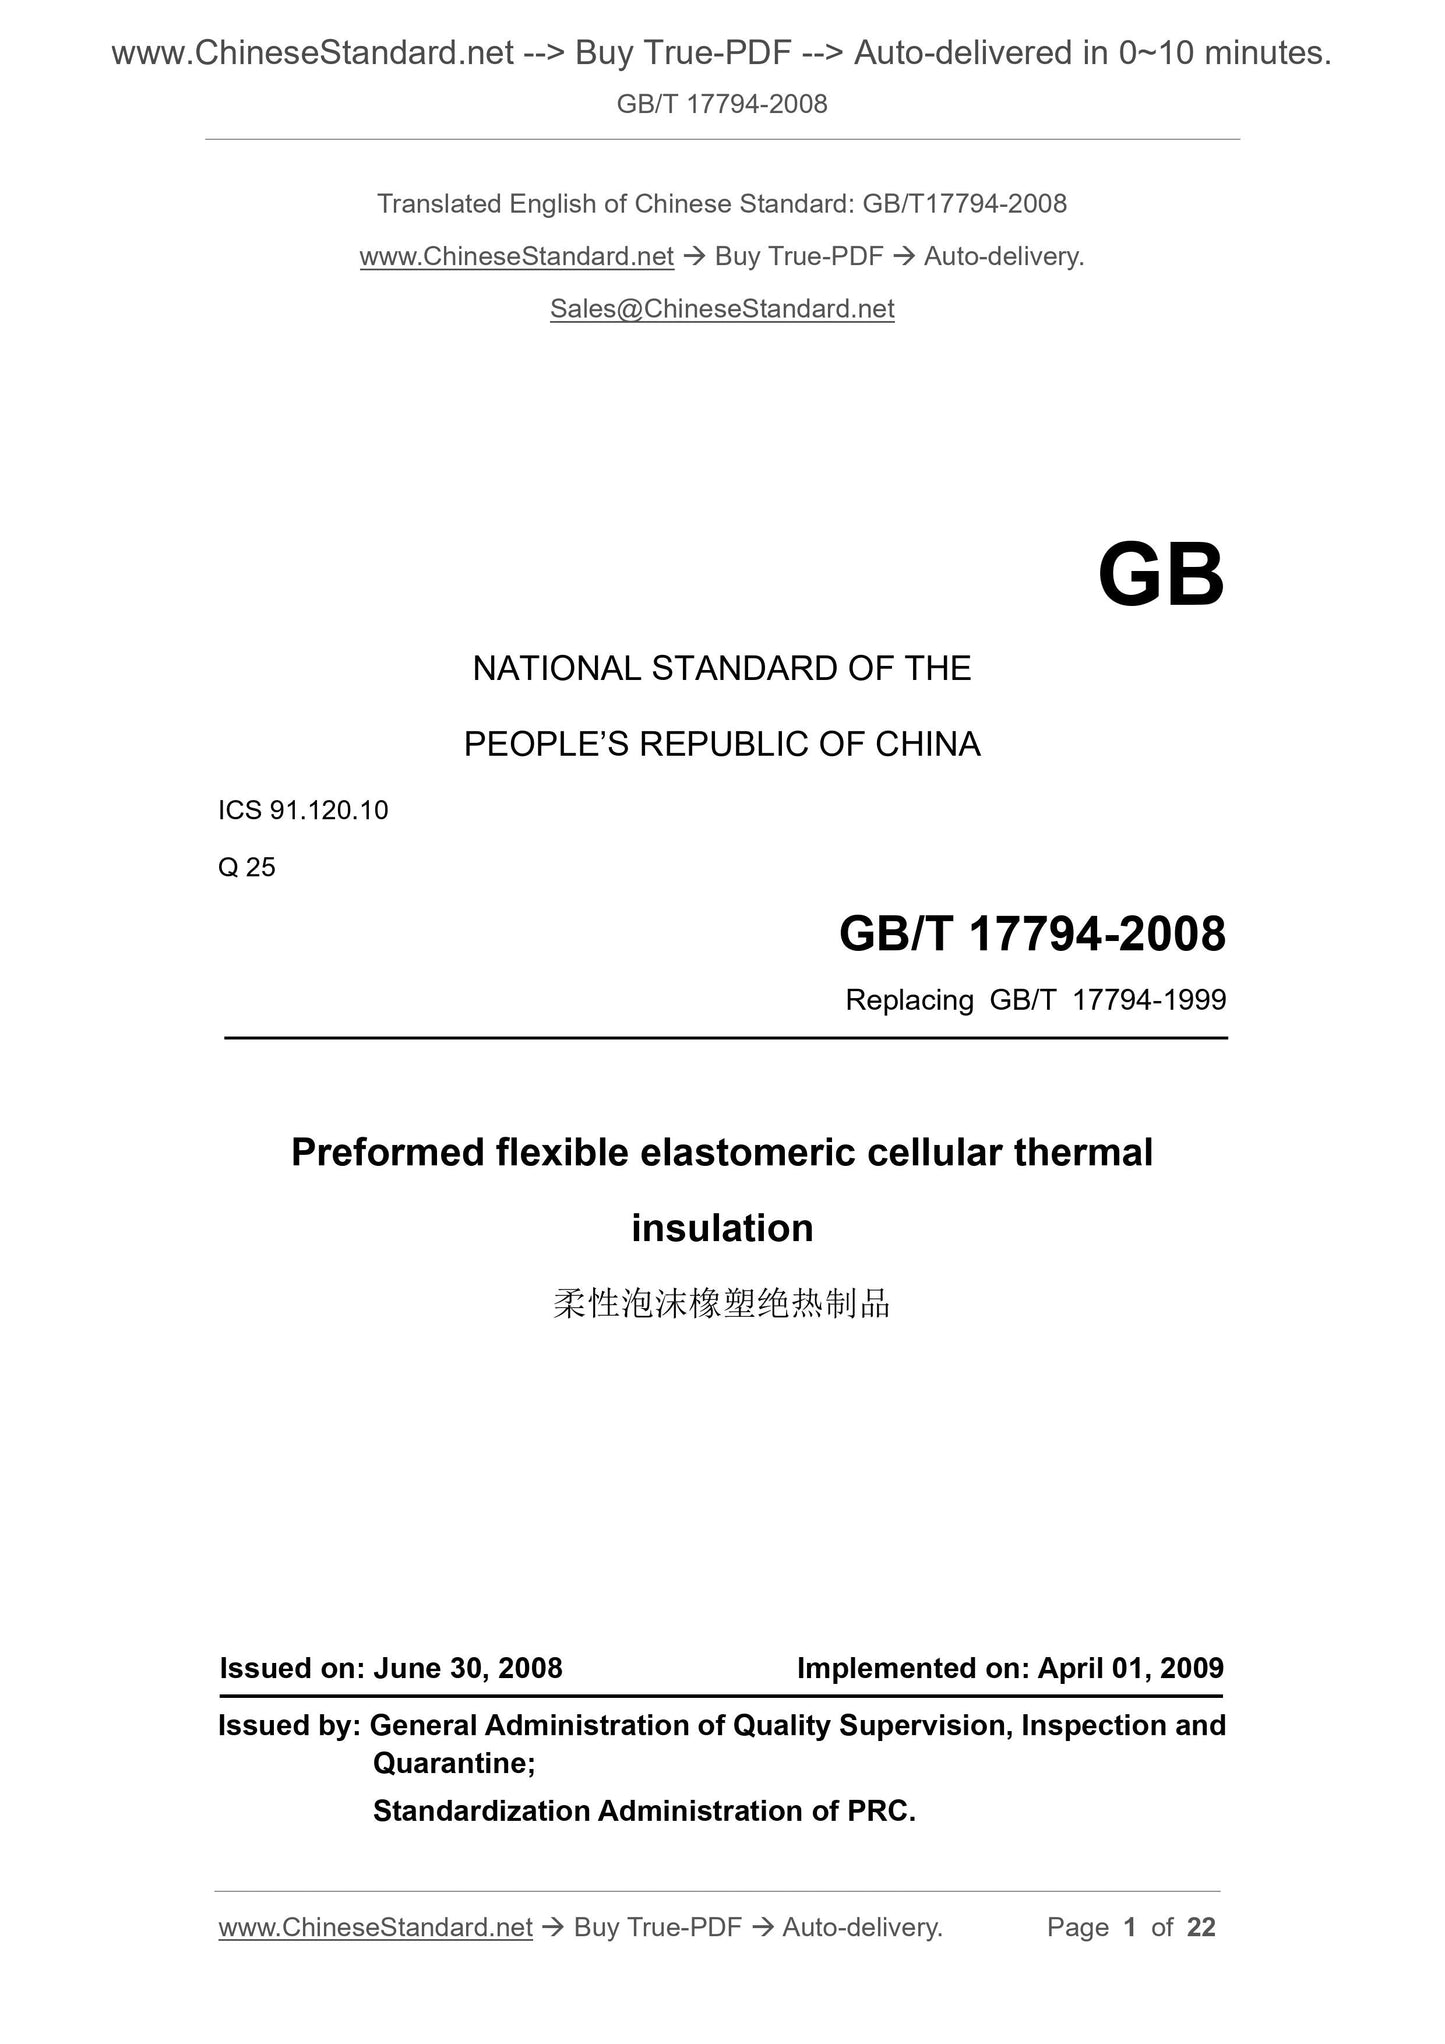 GB/T 17794-2008 Page 1